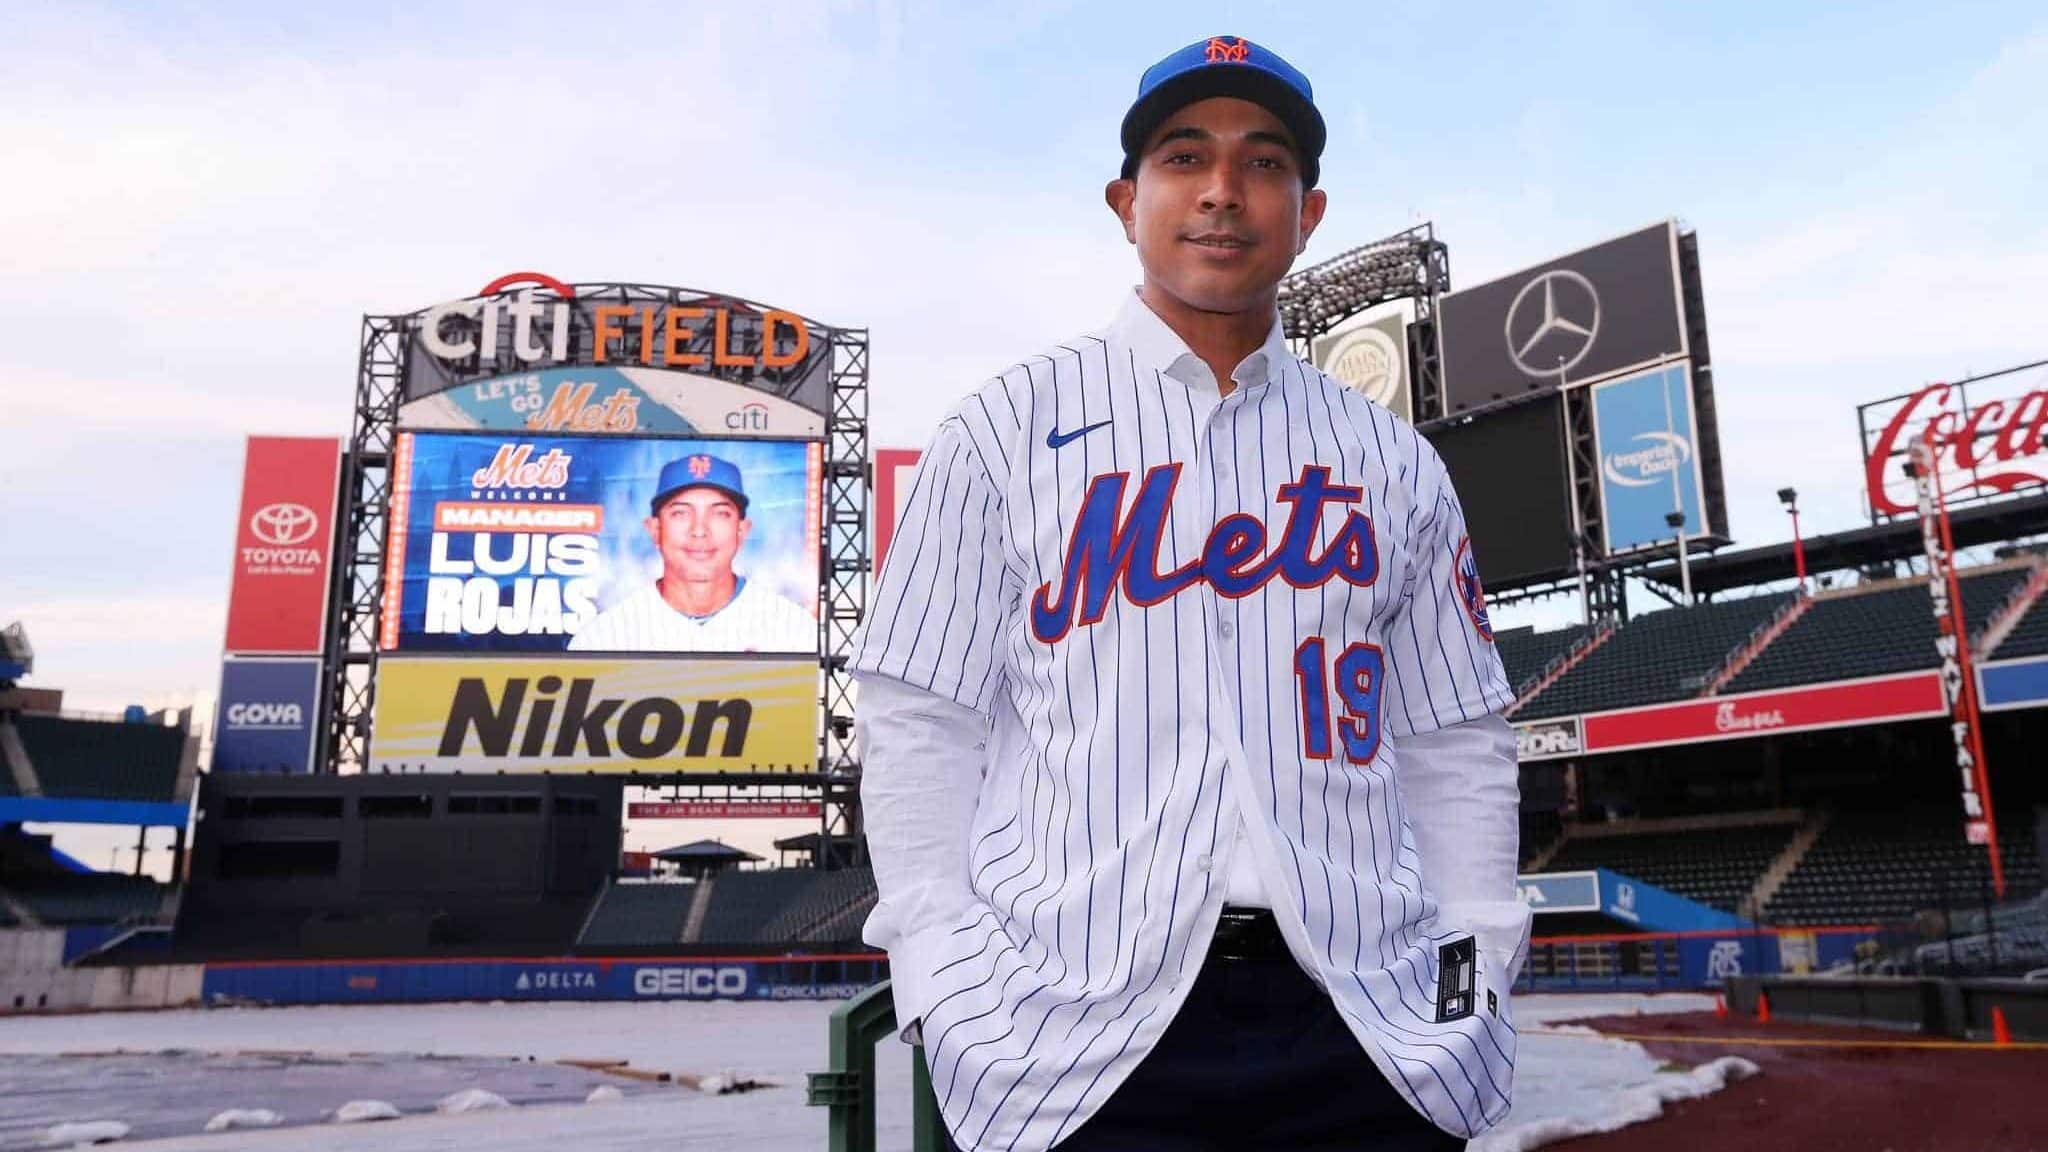 NEW YORK, NY - JANUARY 24: Luis Rojas, the new manager of the New York Mets poses for photos after his introductory press conference at Citi Field on January 24, 2020 in New York City. Rojas had been the Mets quality control coach and was tapped as a replacement after the newly hired Carlos Beltrán was implicated for his role as a player in 2017 in the Houston Astros sign-stealing scandal.